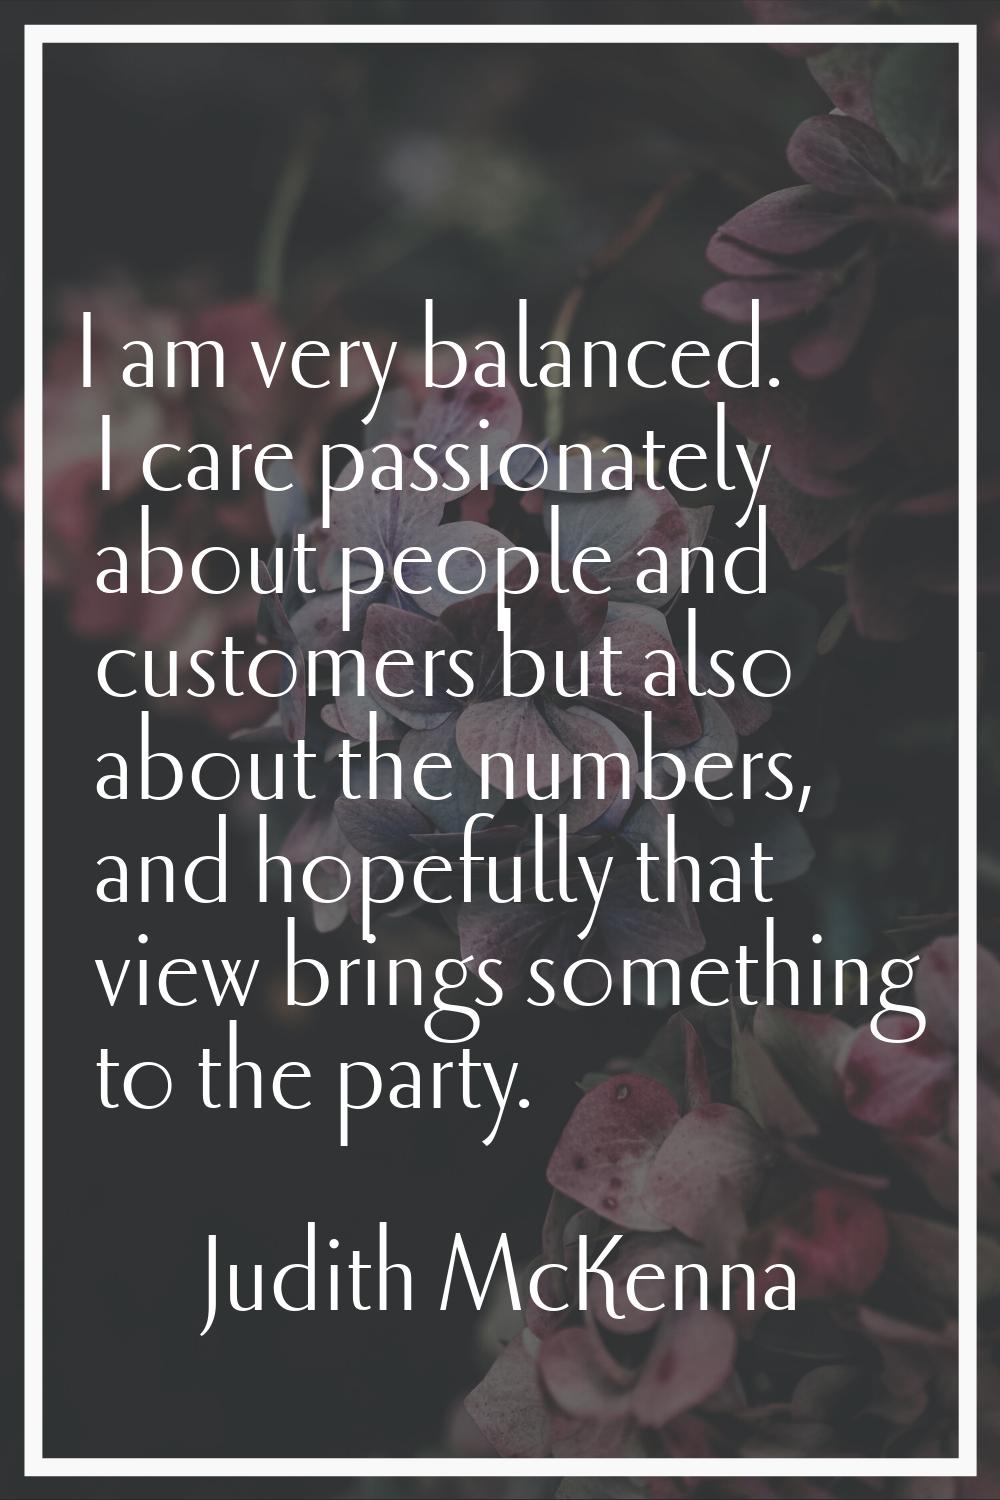 I am very balanced. I care passionately about people and customers but also about the numbers, and 